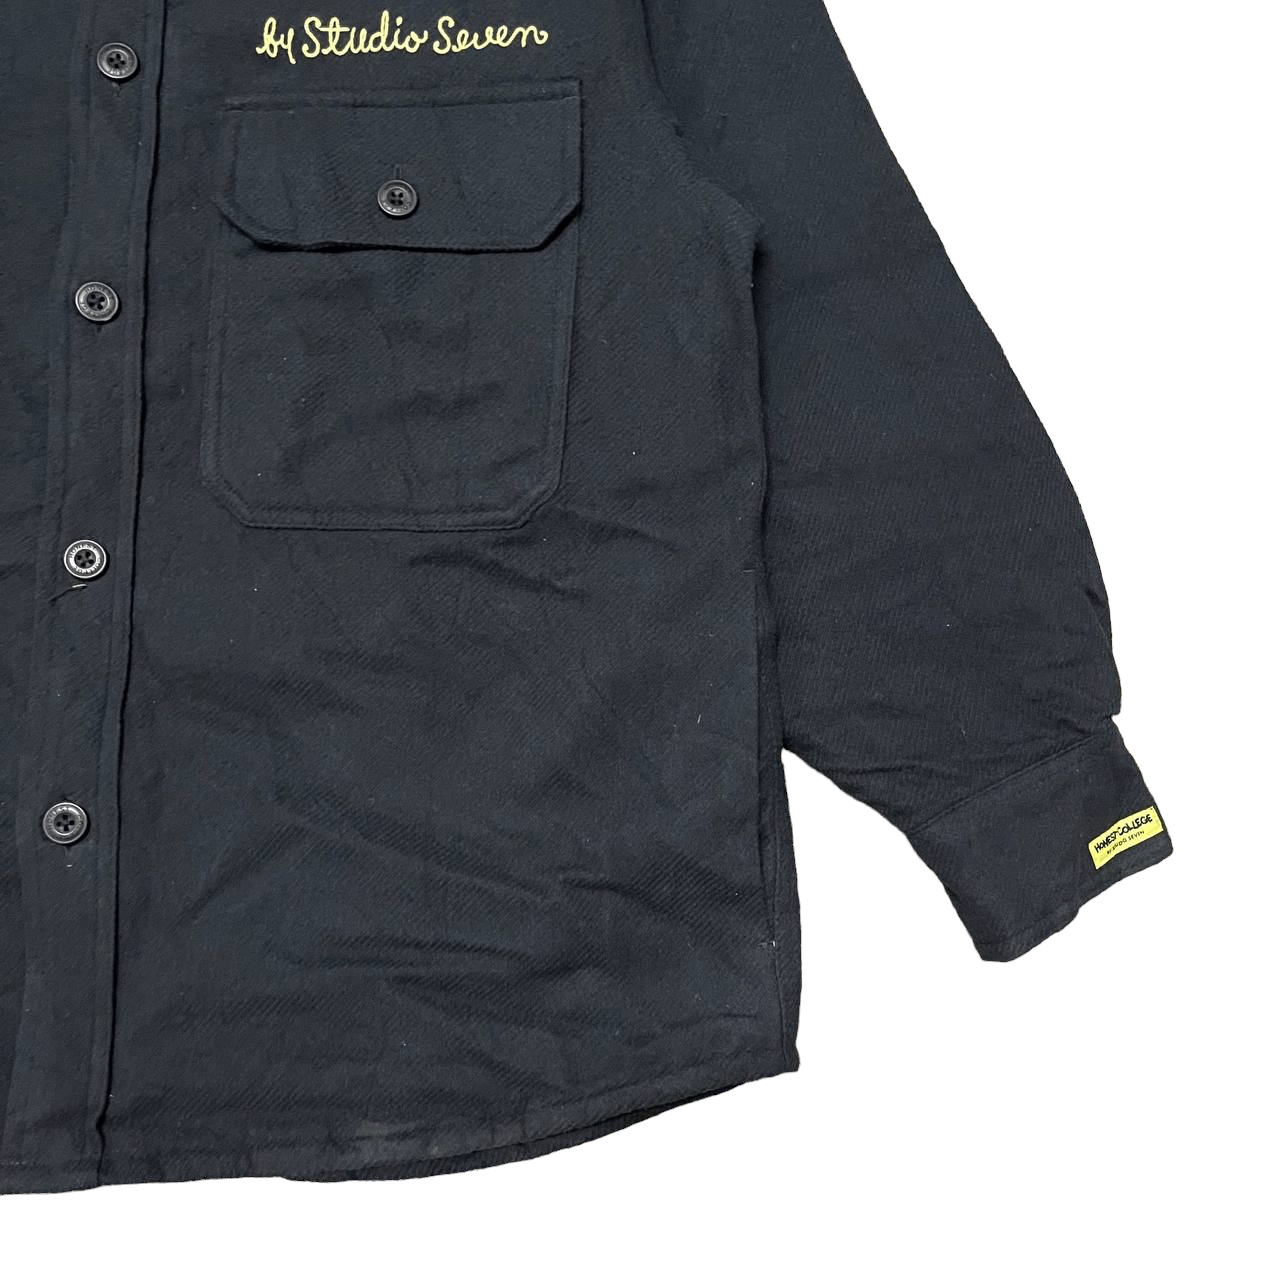 Japanese Brand - Vintage Honest College by Studio Seven Jacket Embroidery - 6